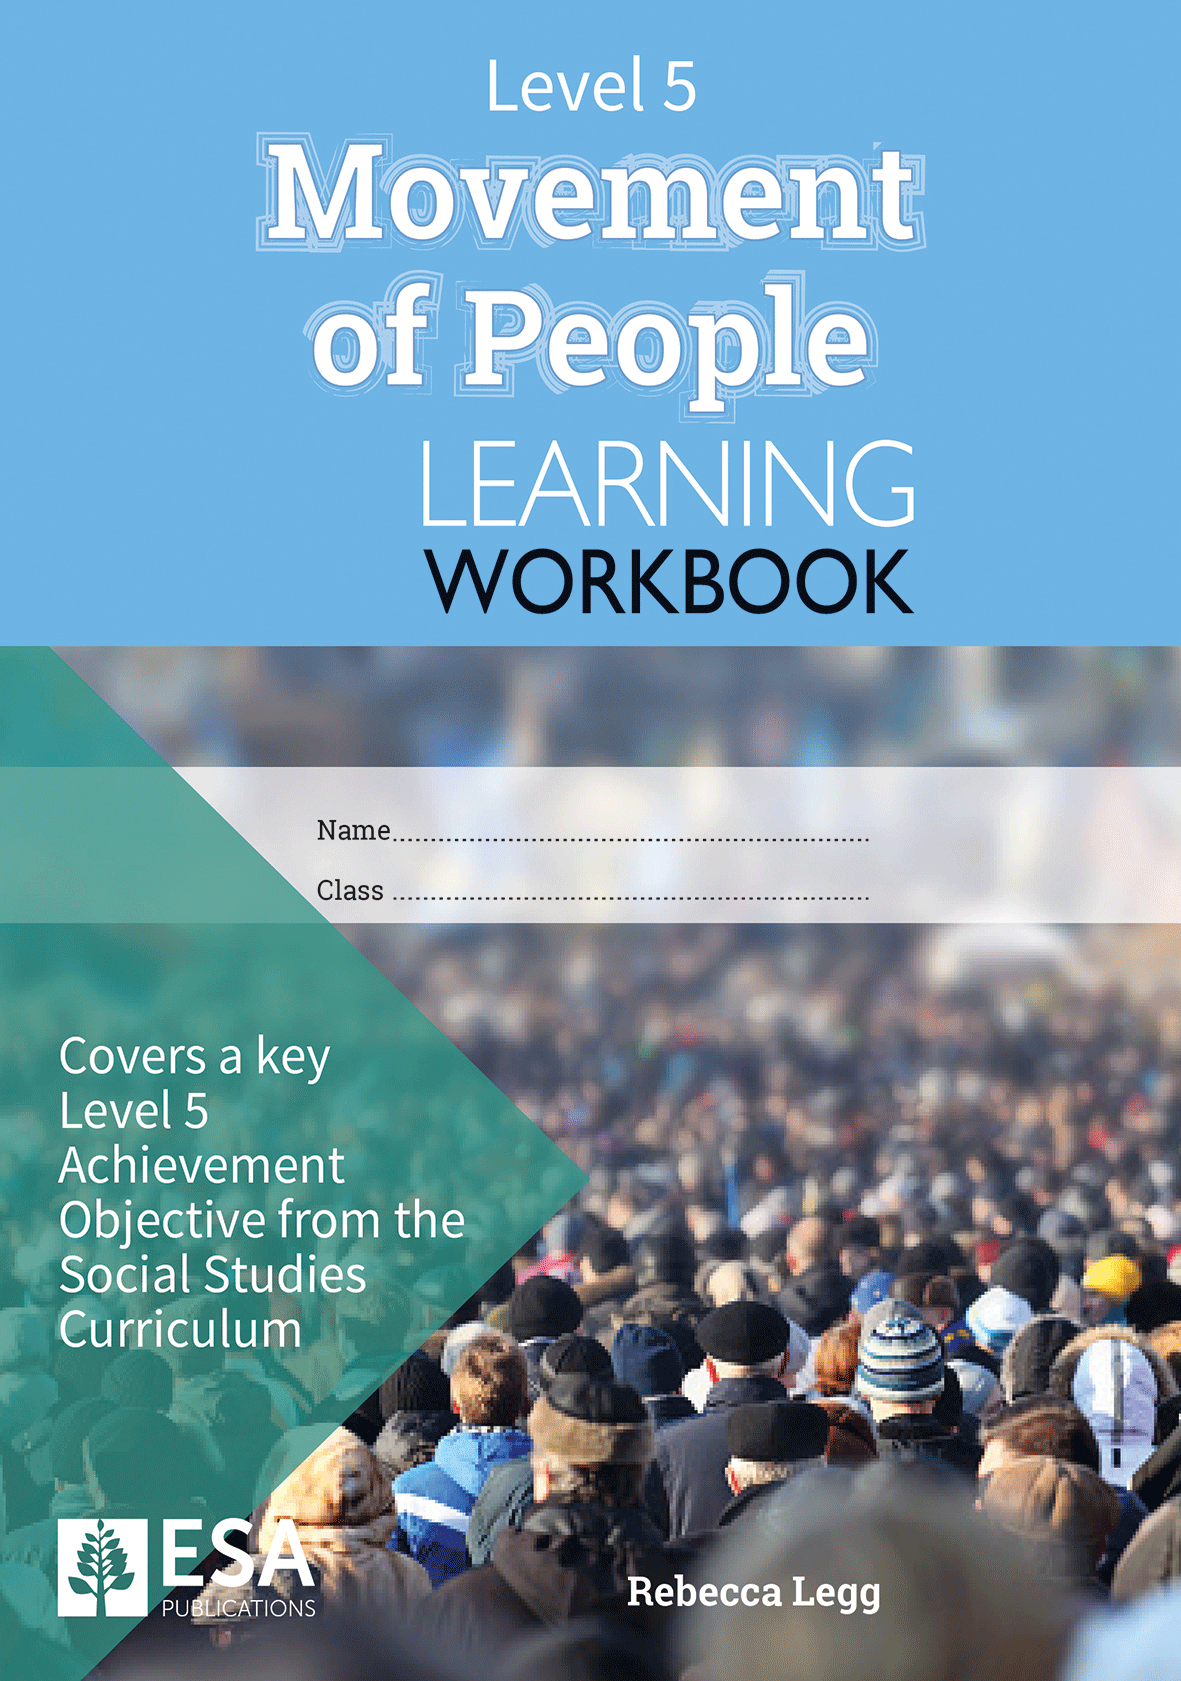 Level 5 Movement of People Learning Workbook